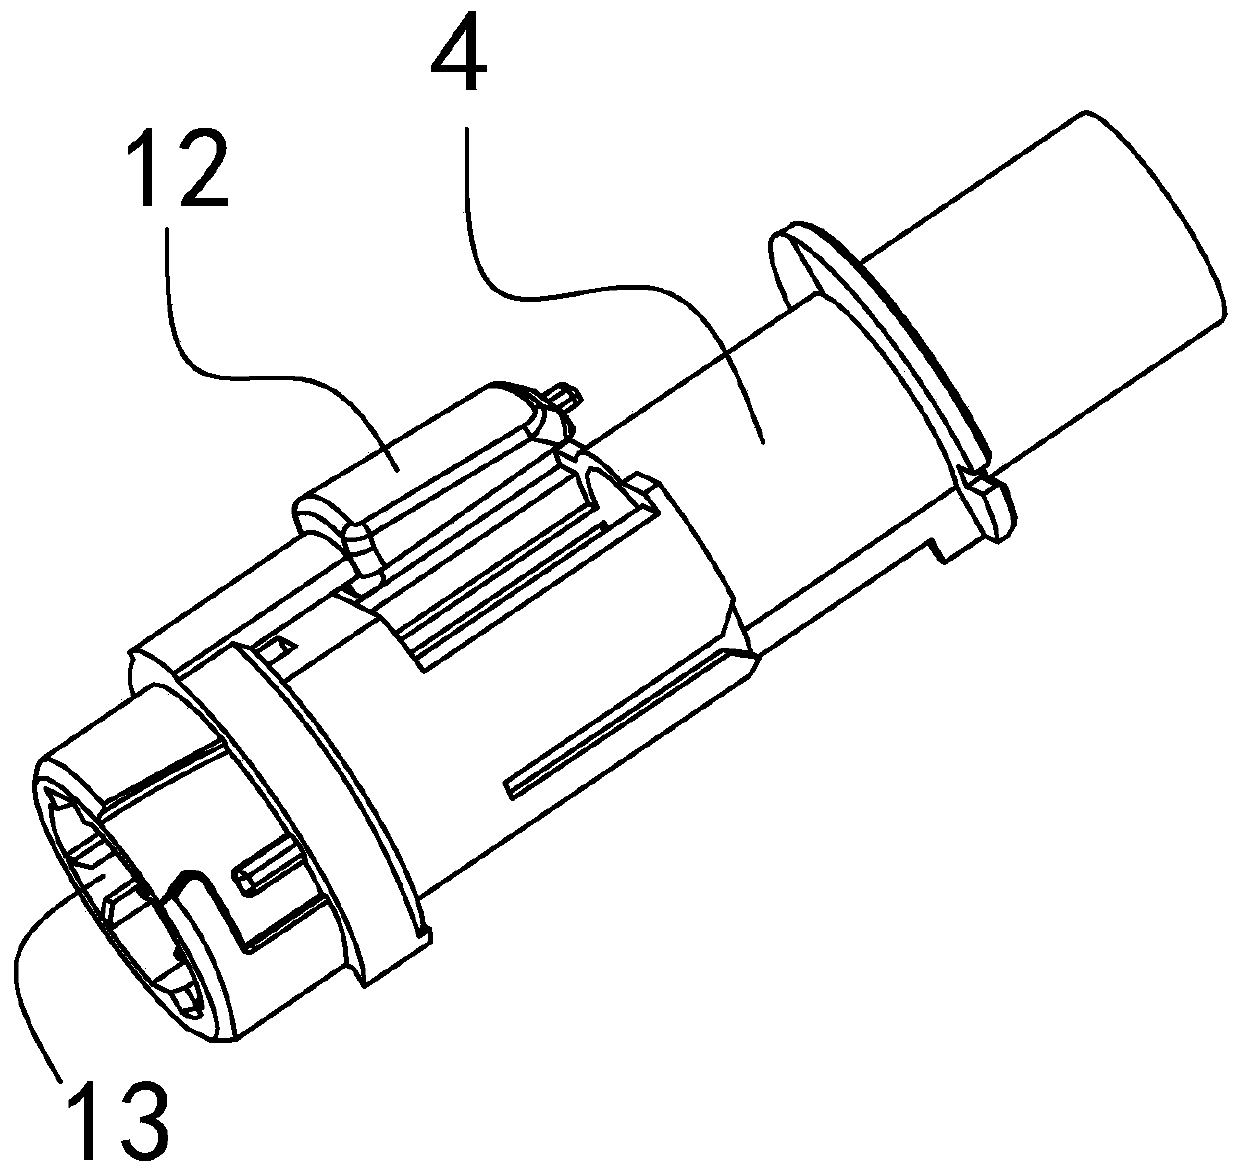 A blood sampling pen with bias guiding and anti-secondary puncture